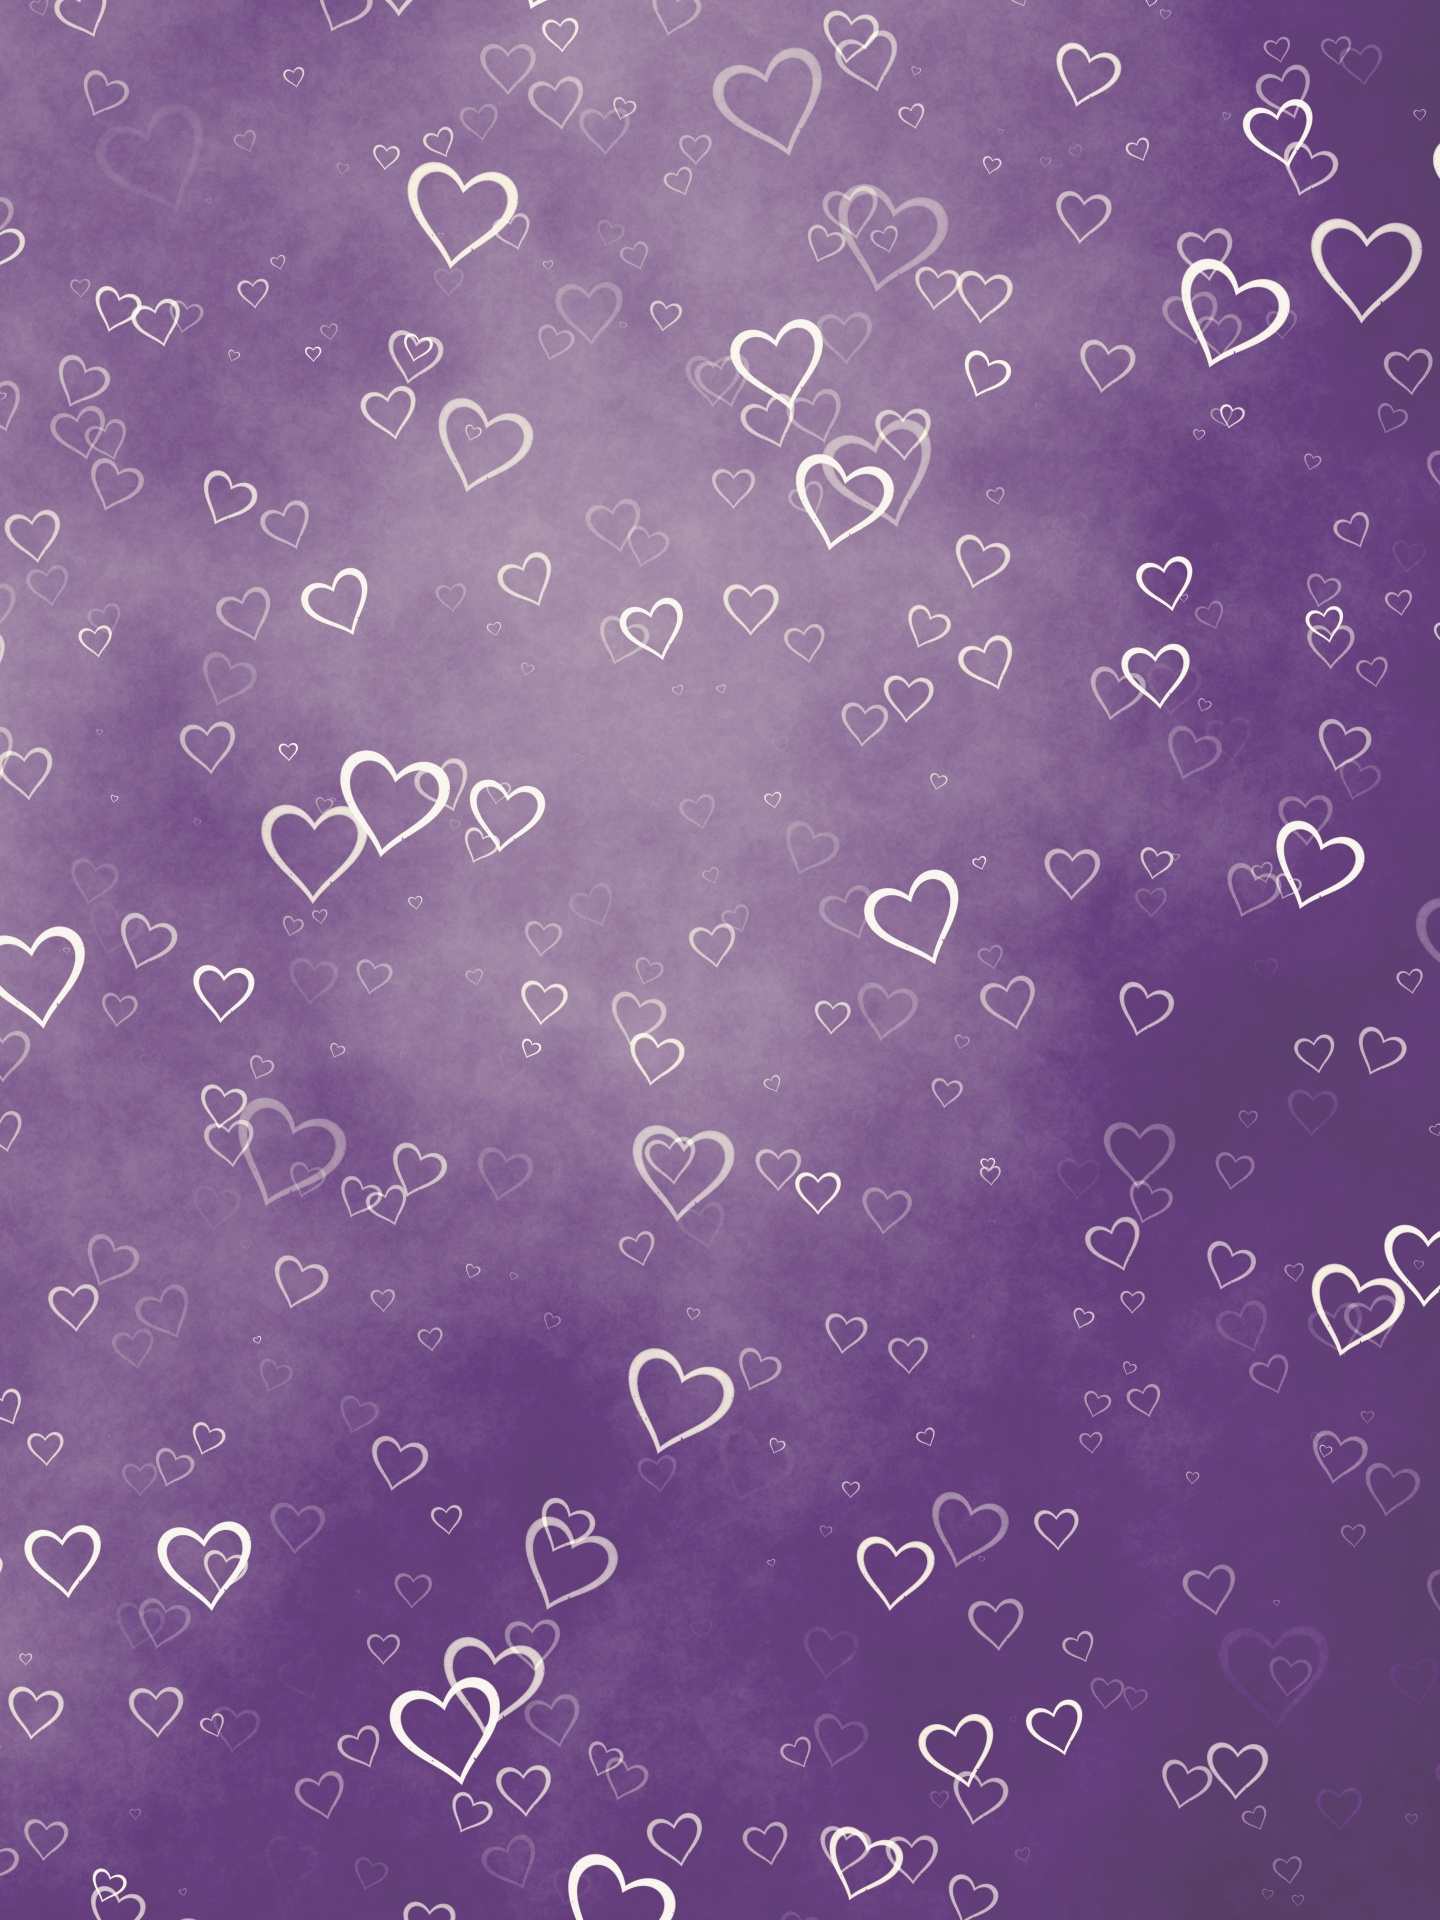 Hearts Bokeh Background Texture Free Stock Photo - Public Domain Pictures